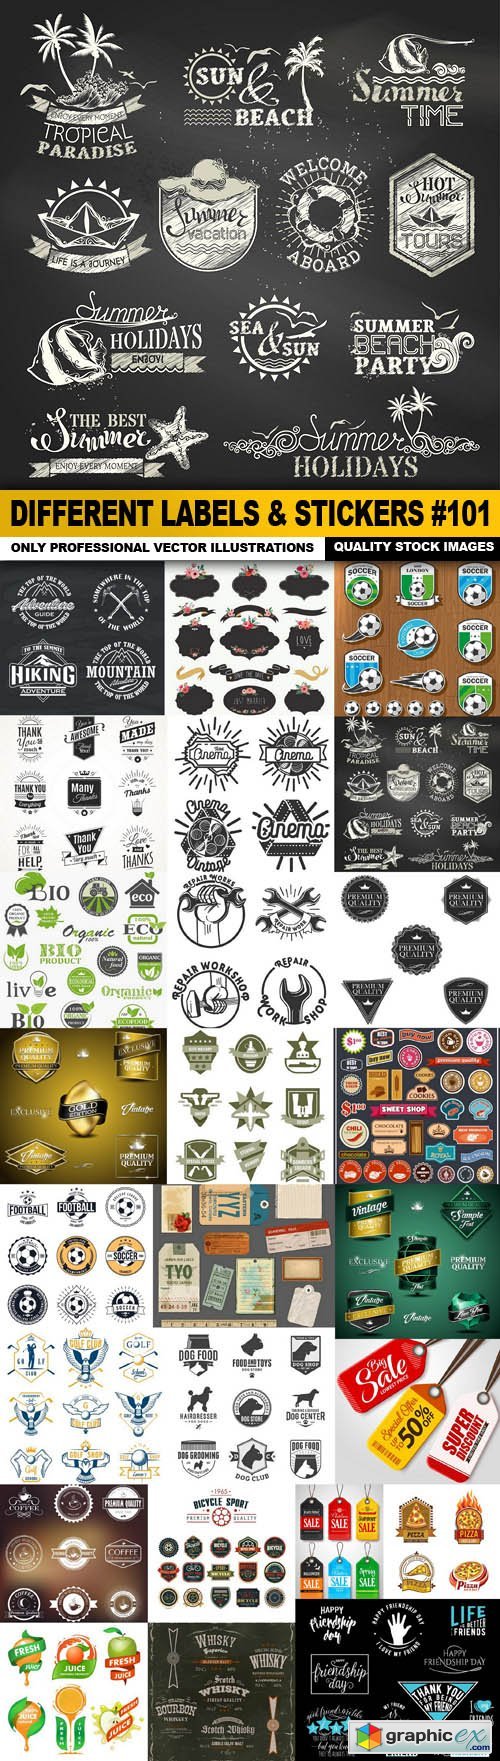 Different Labels & Stickers #101 - 25 Vector